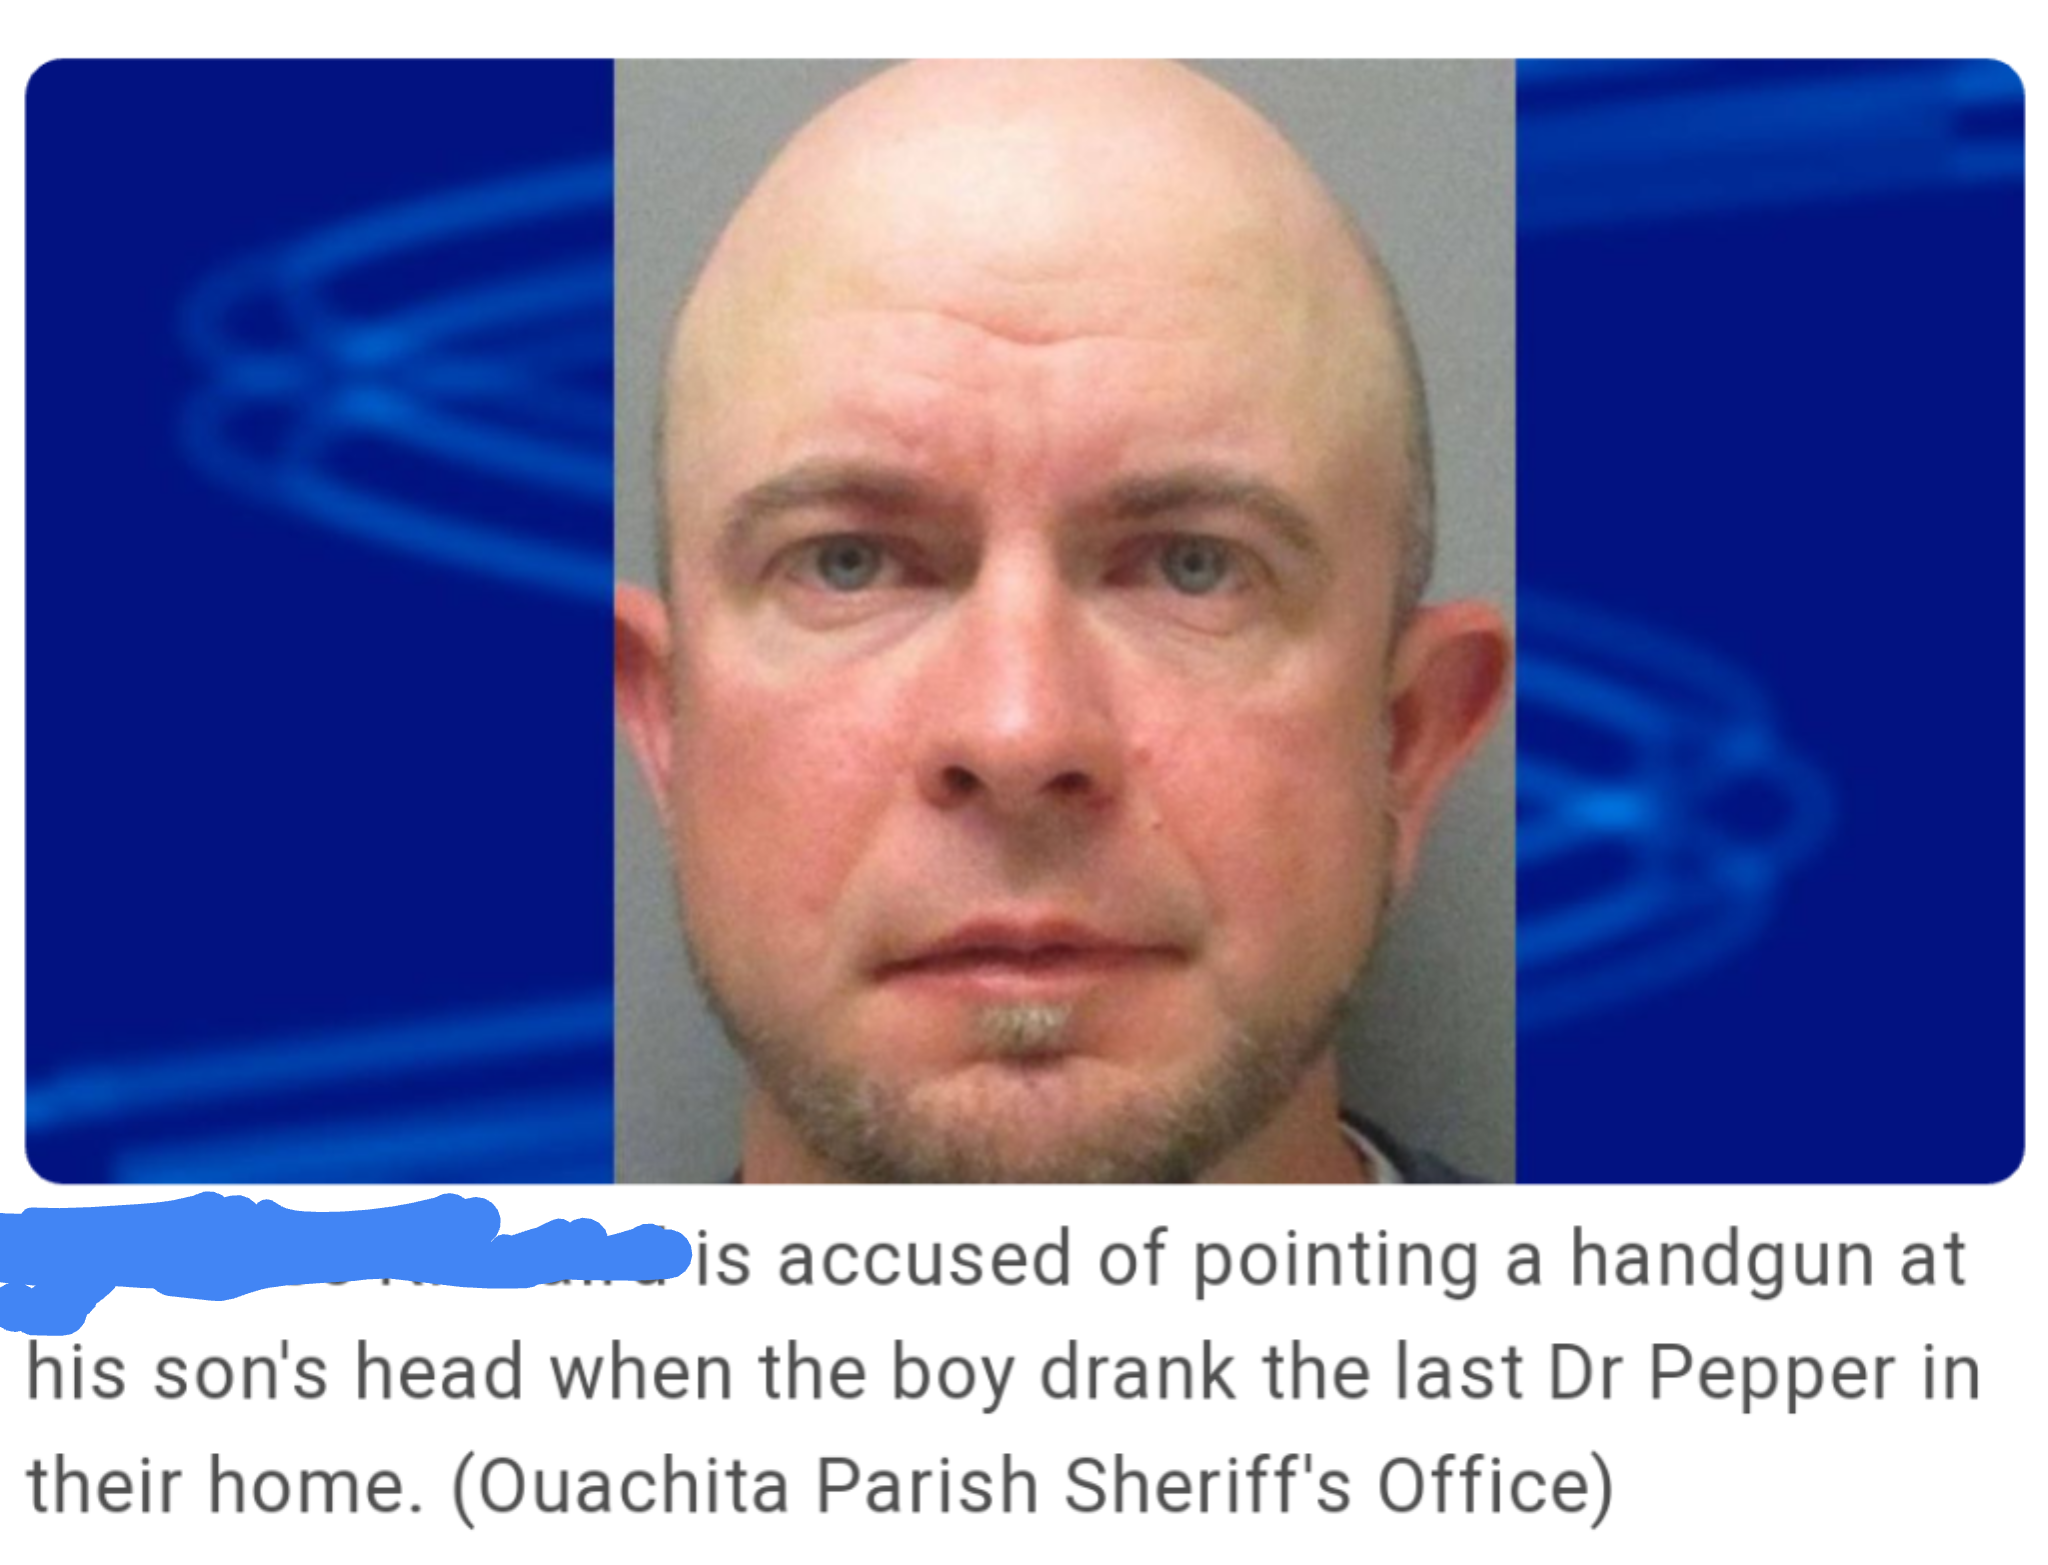 chad kinnaird - is accused of pointing a handgun at his son's head when the boy drank the last Dr Pepper in their home. Ouachita Parish Sheriff's Office